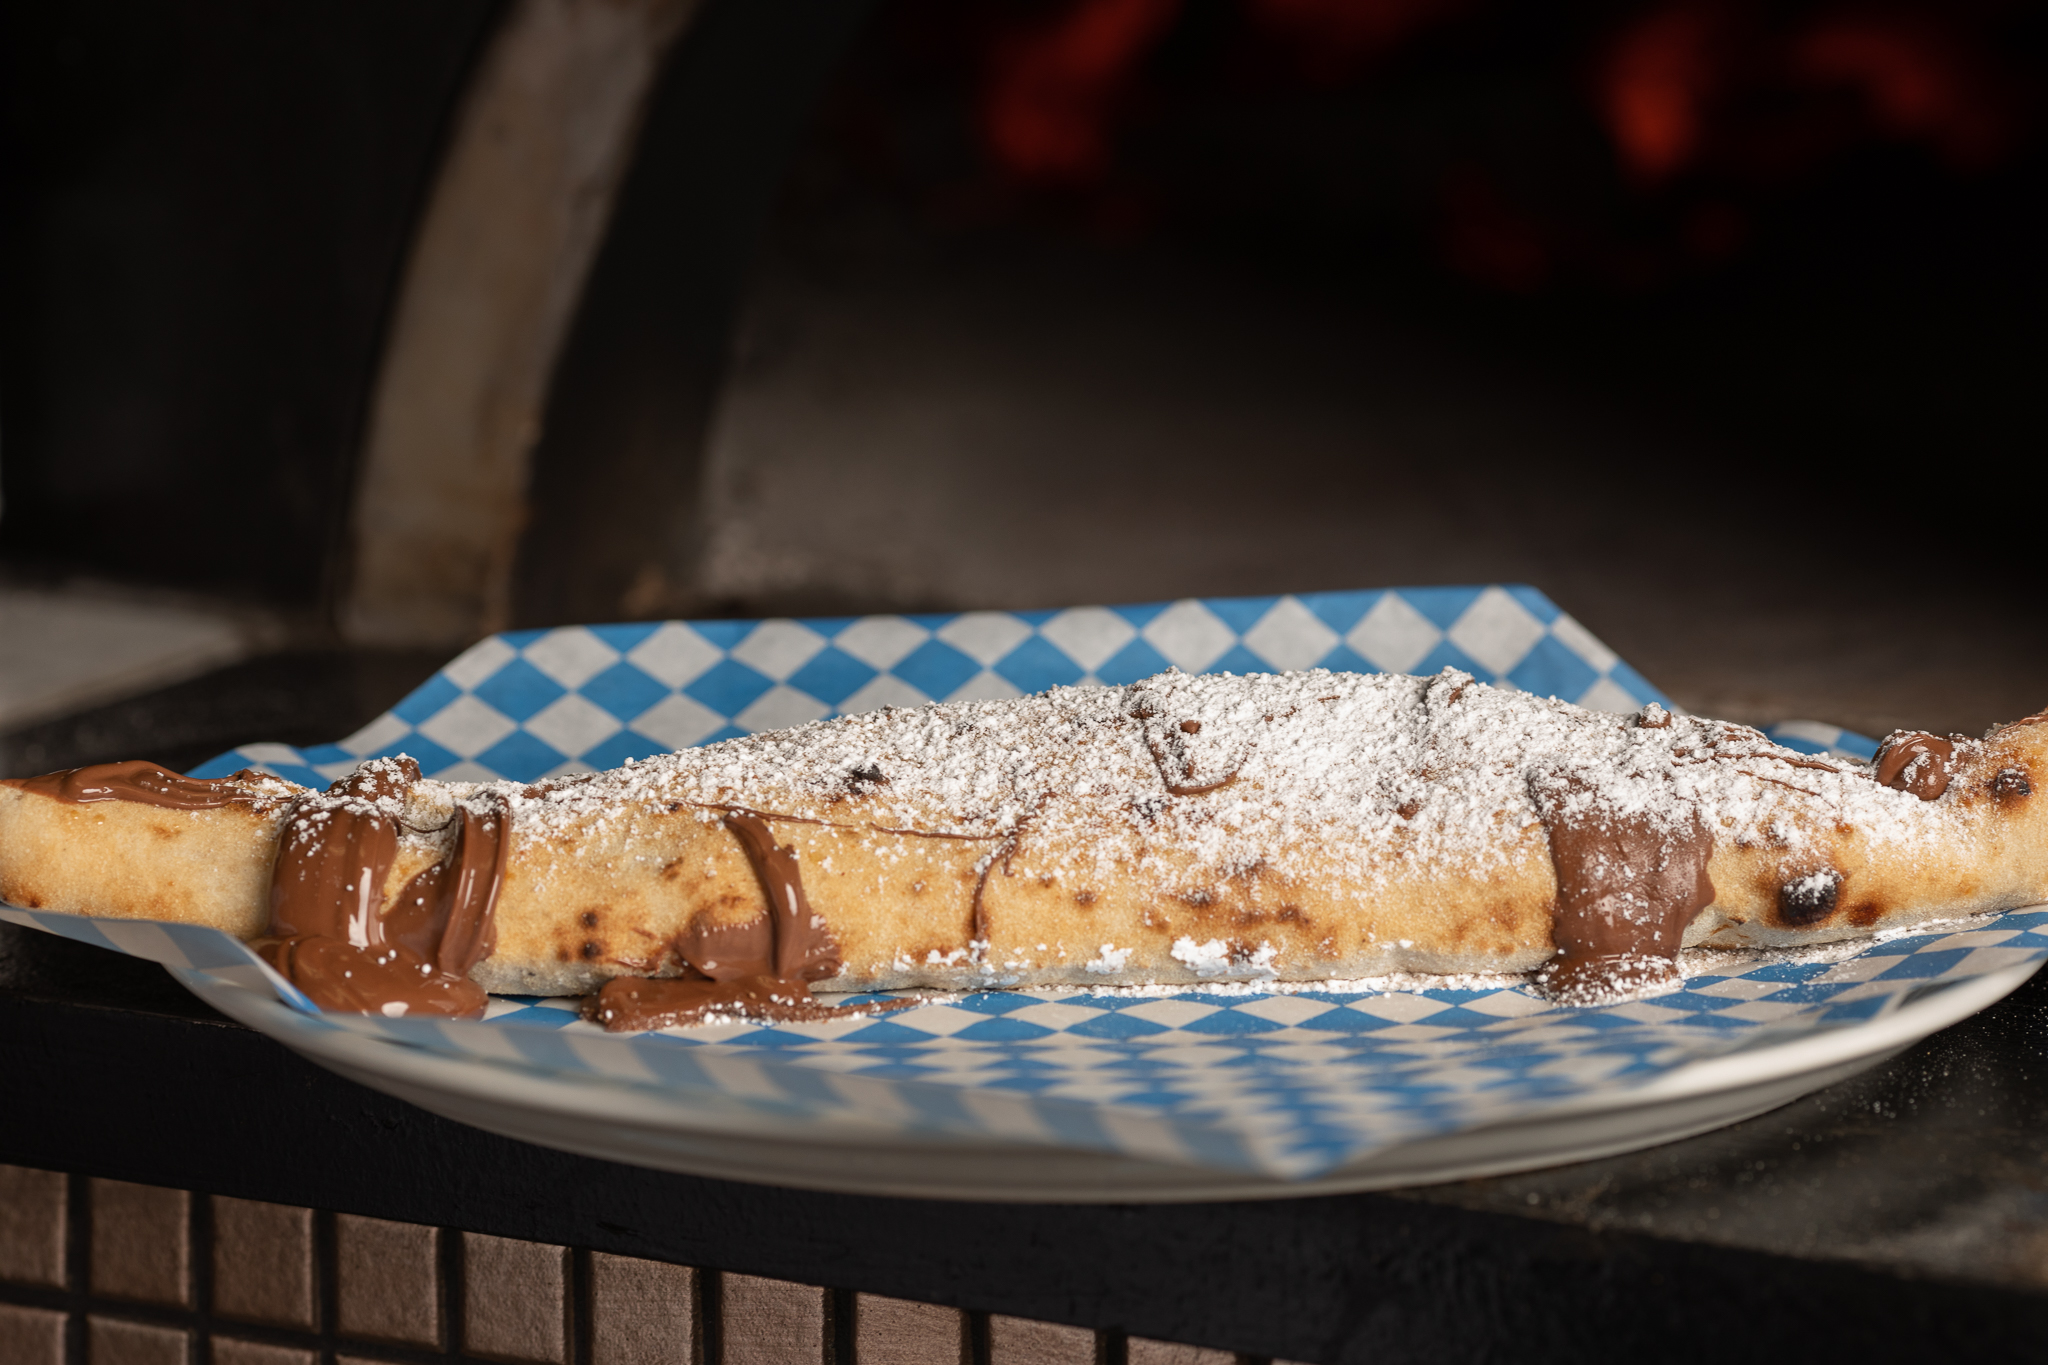 Nutella & ricotta stuffed calzone baked & then finished off with Nutella & powdered sugar